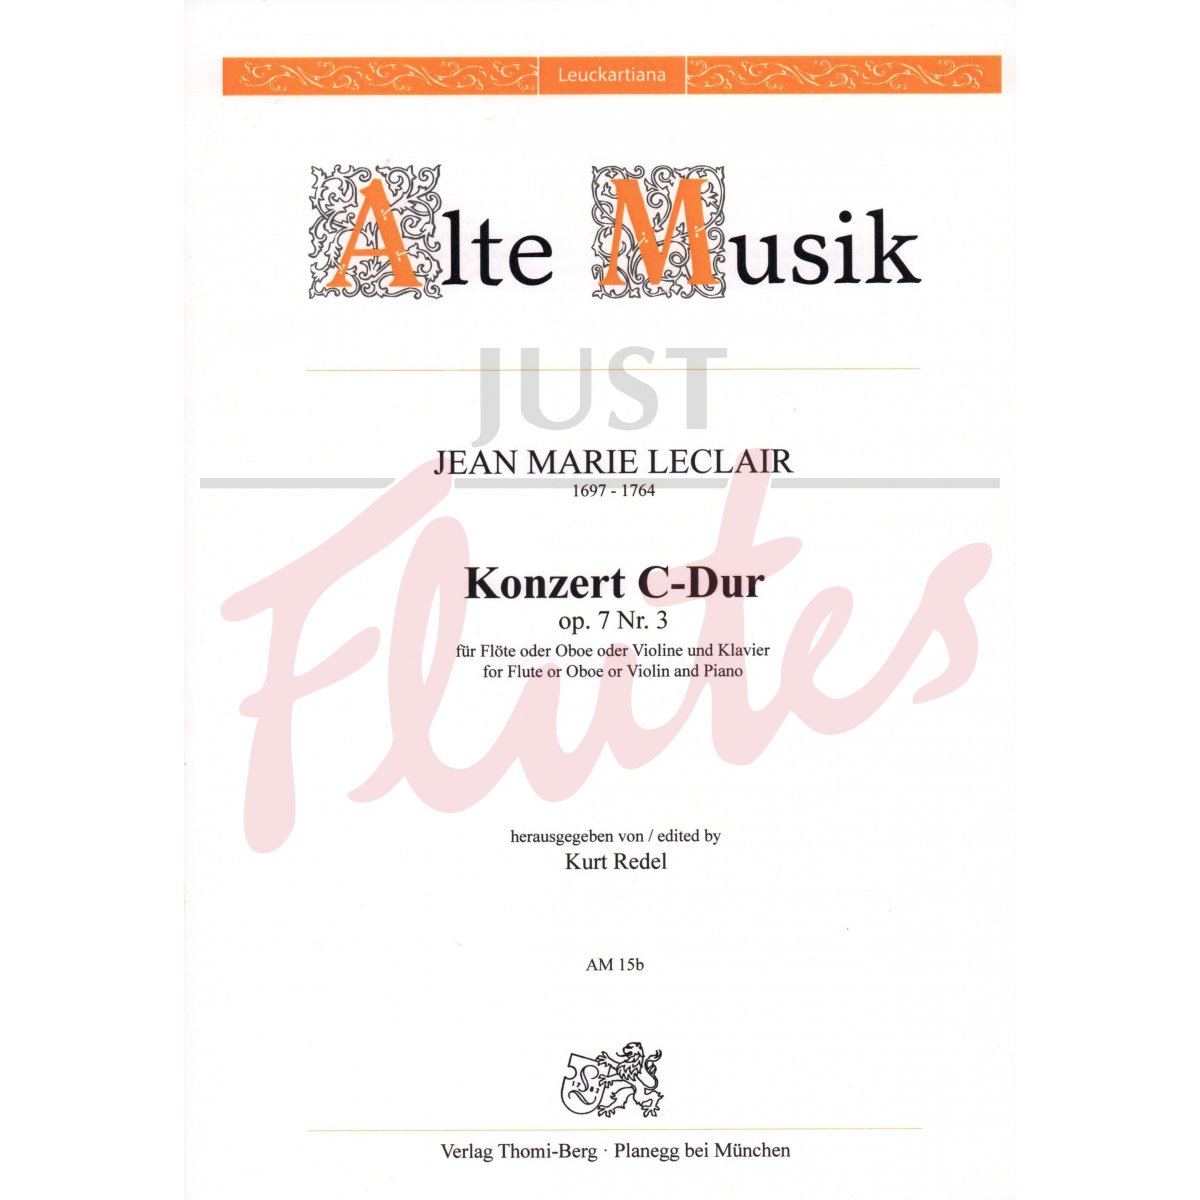 Concerto in C major for Flute and Piano